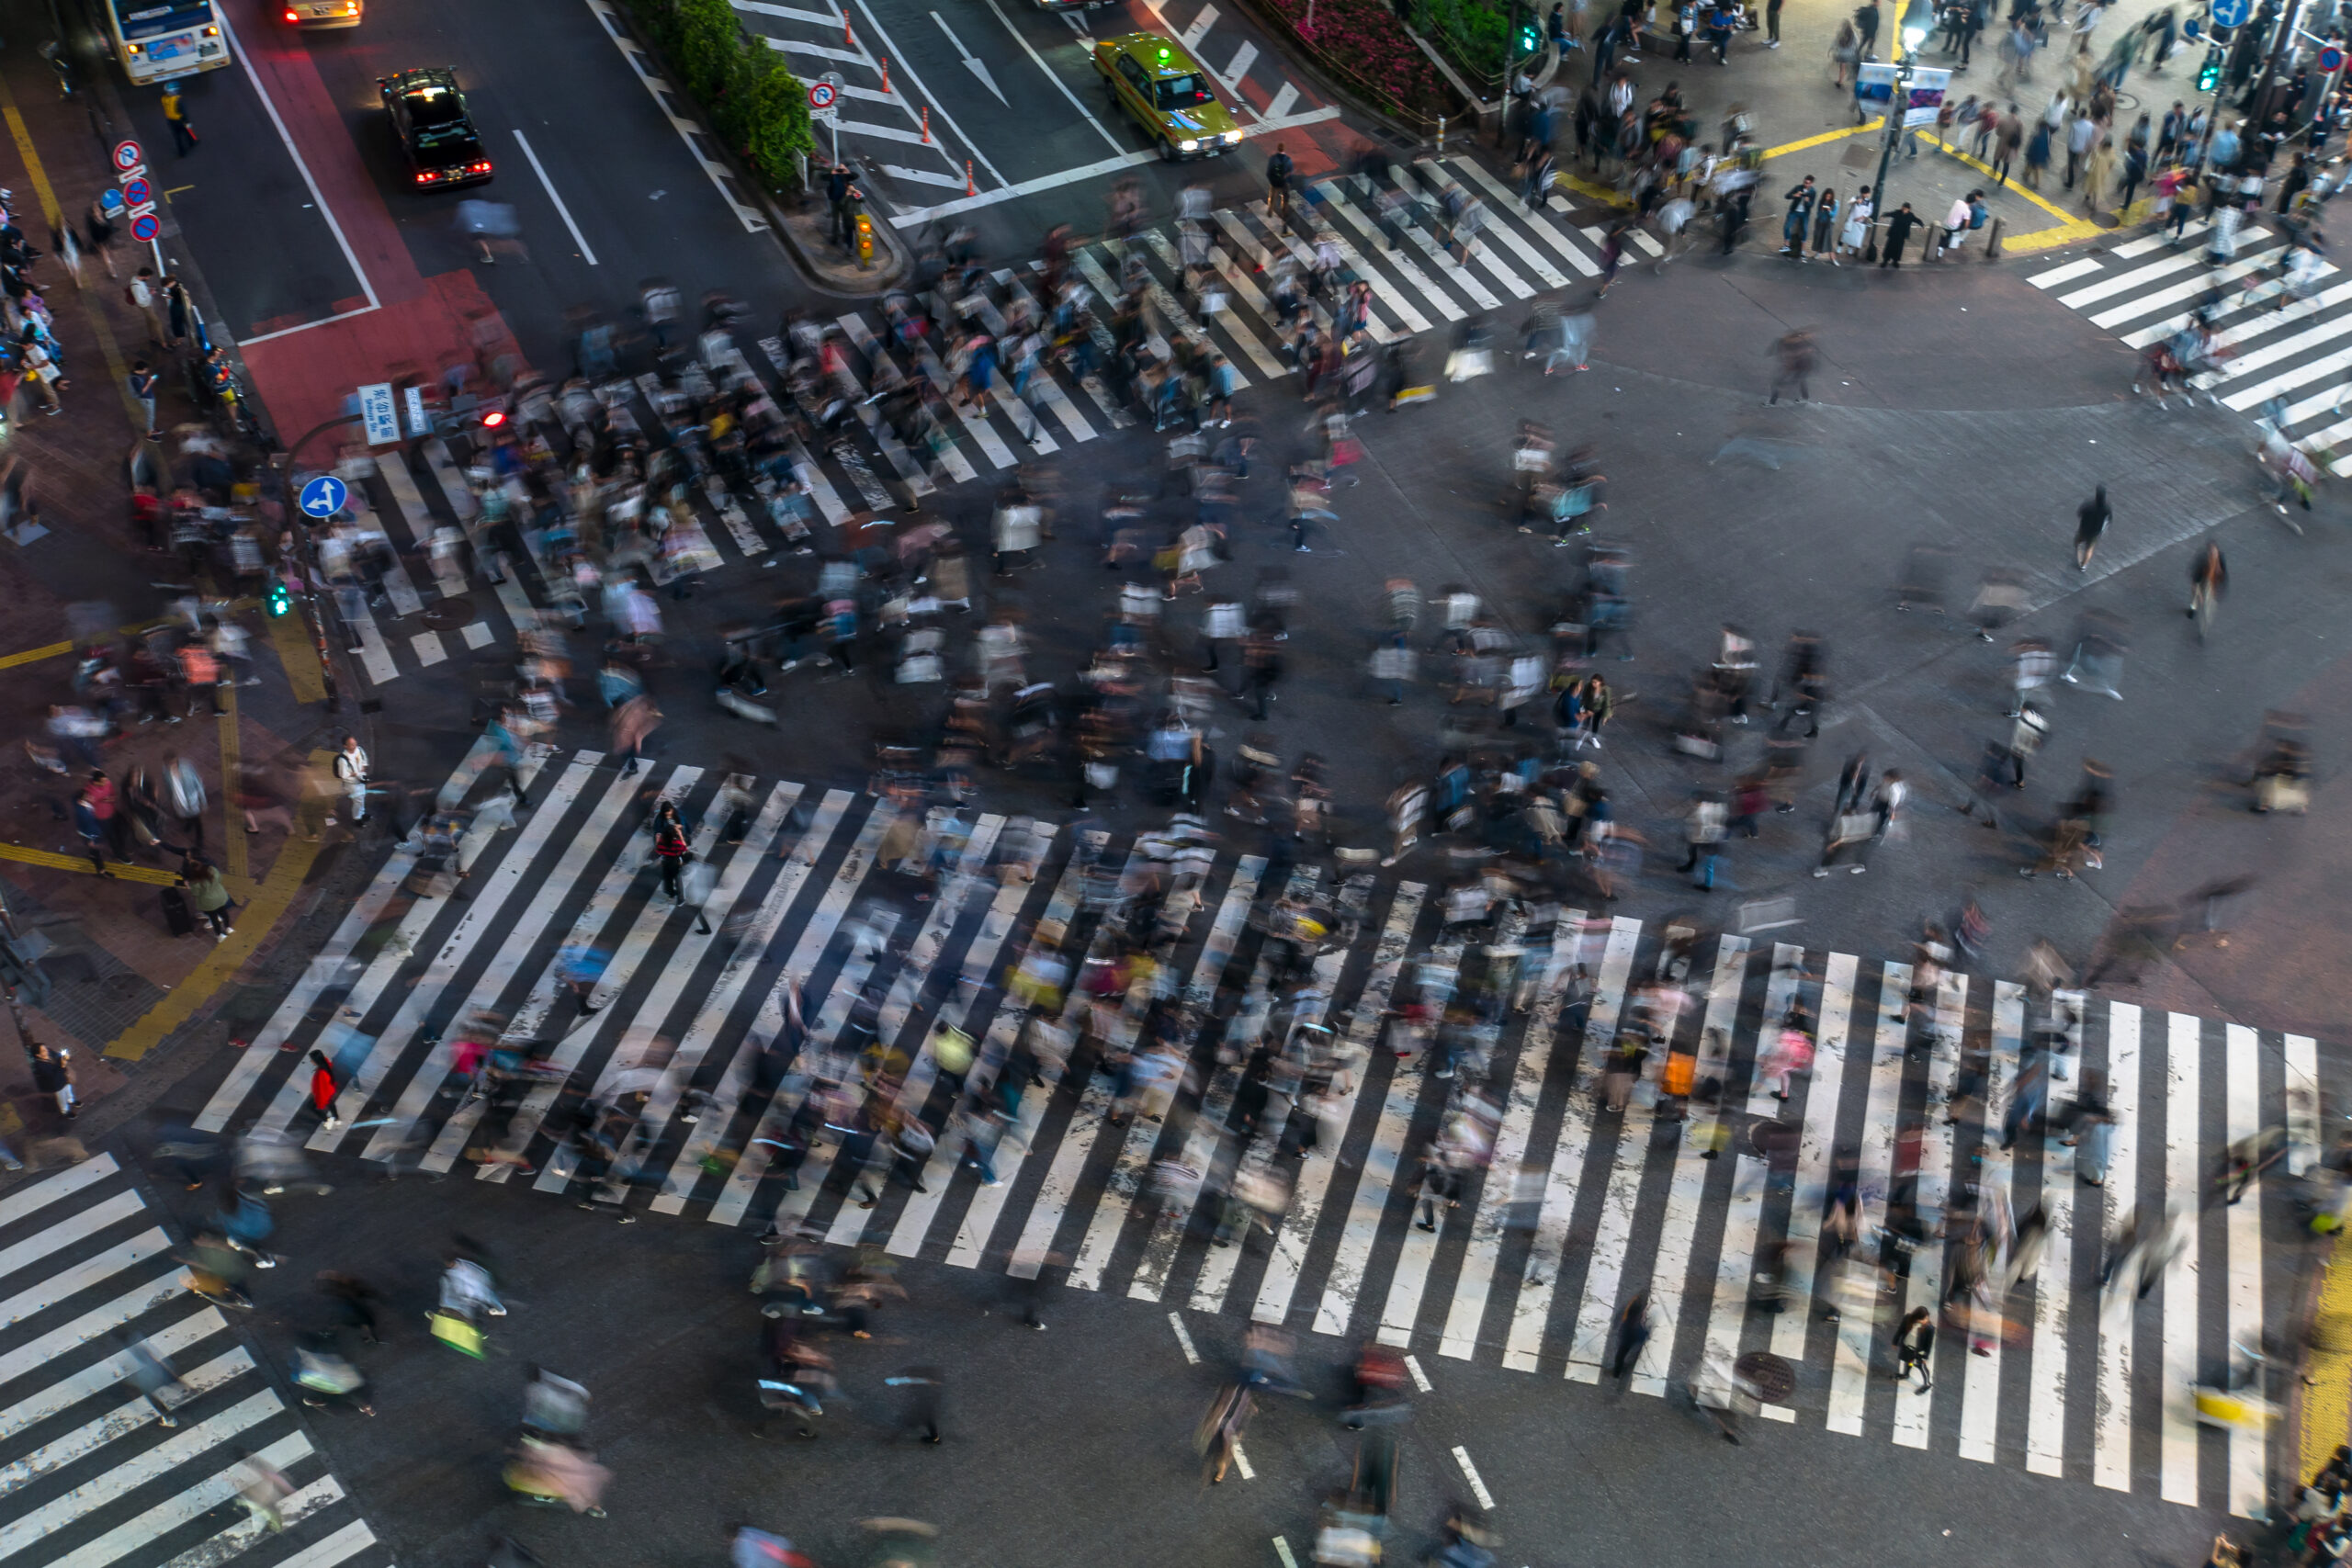 An aerial view of a busy pedestrian crossing